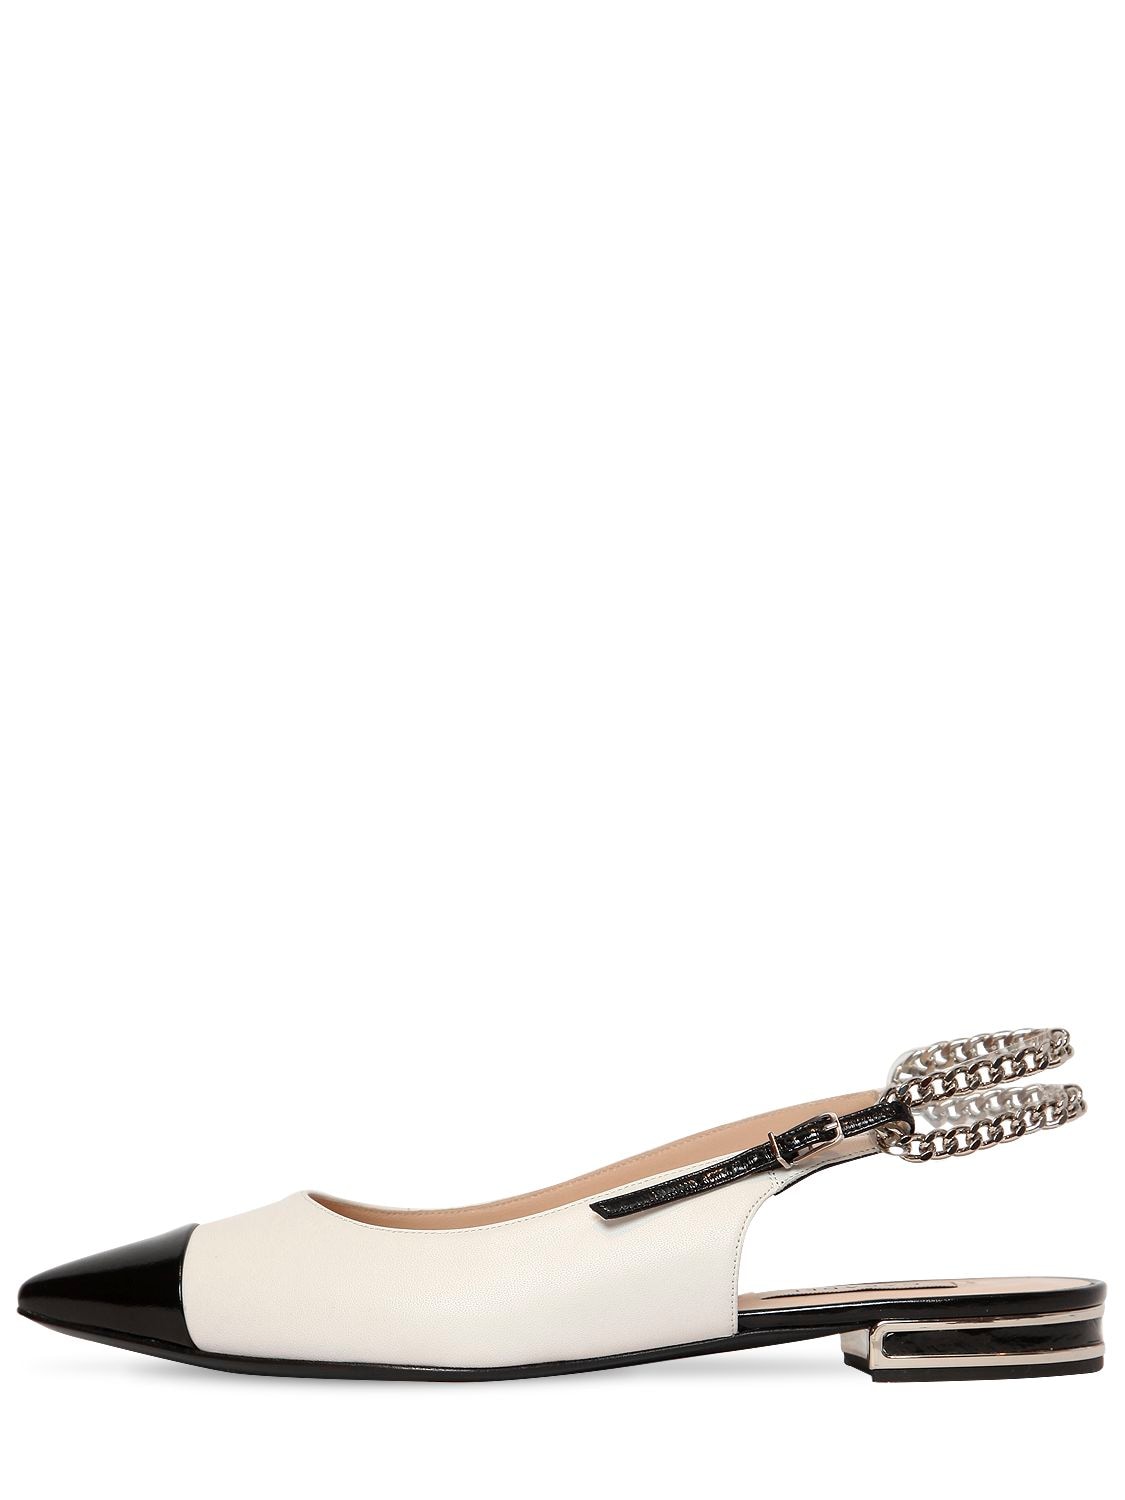 Casadei 10mm Chained Leather Sling Back Flats In White,black